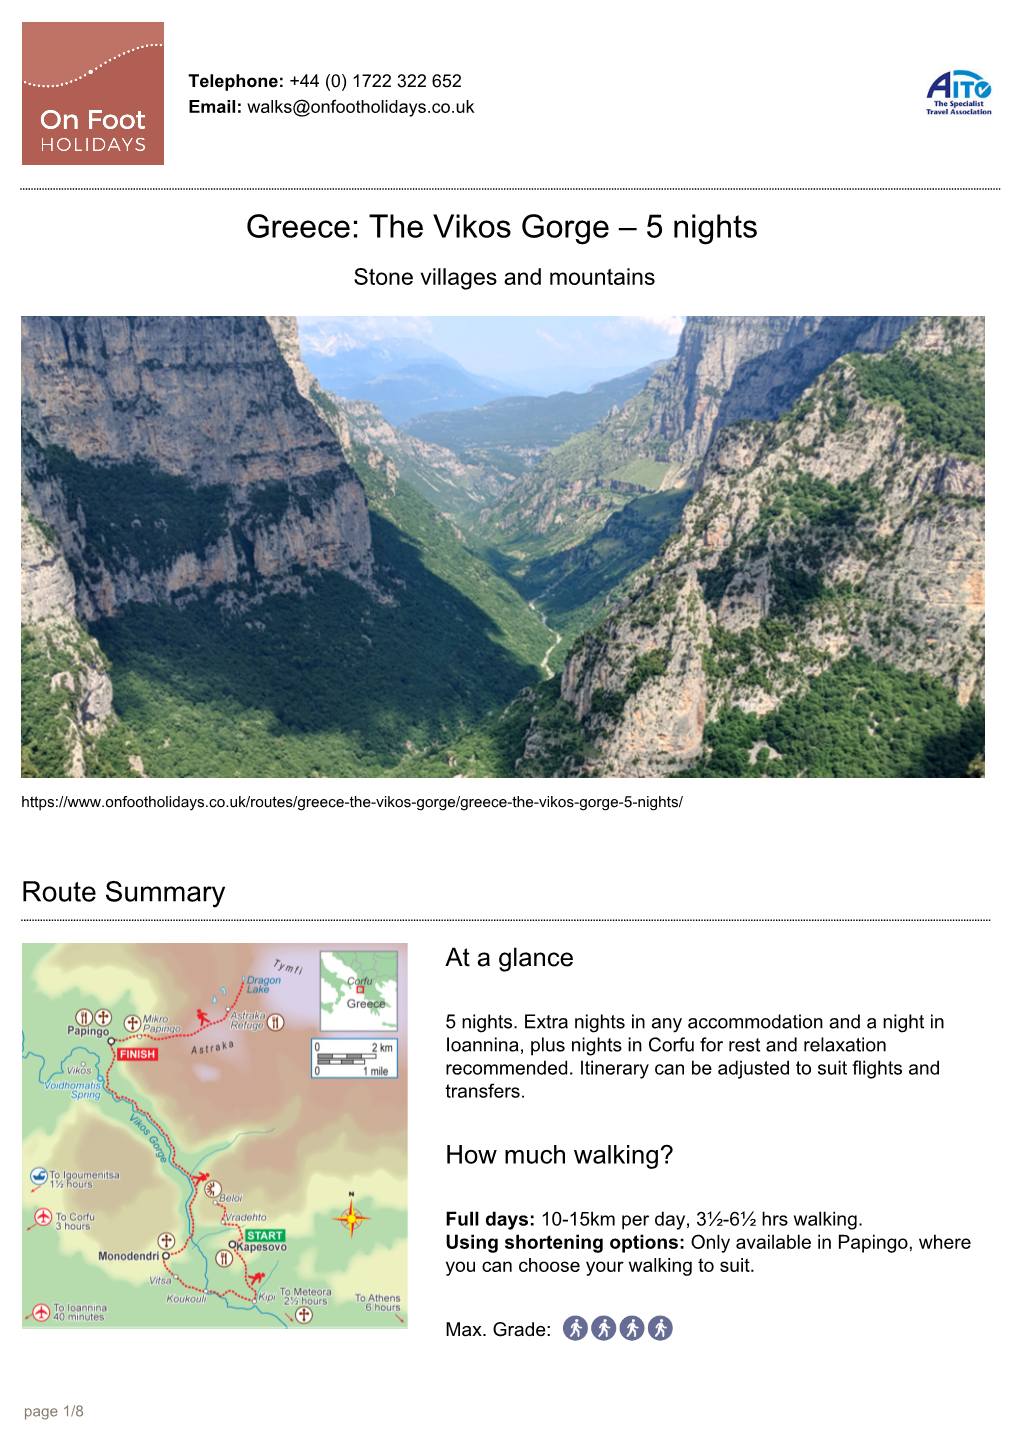 Greece: the Vikos Gorge – 5 Nights Stone Villages and Mountains